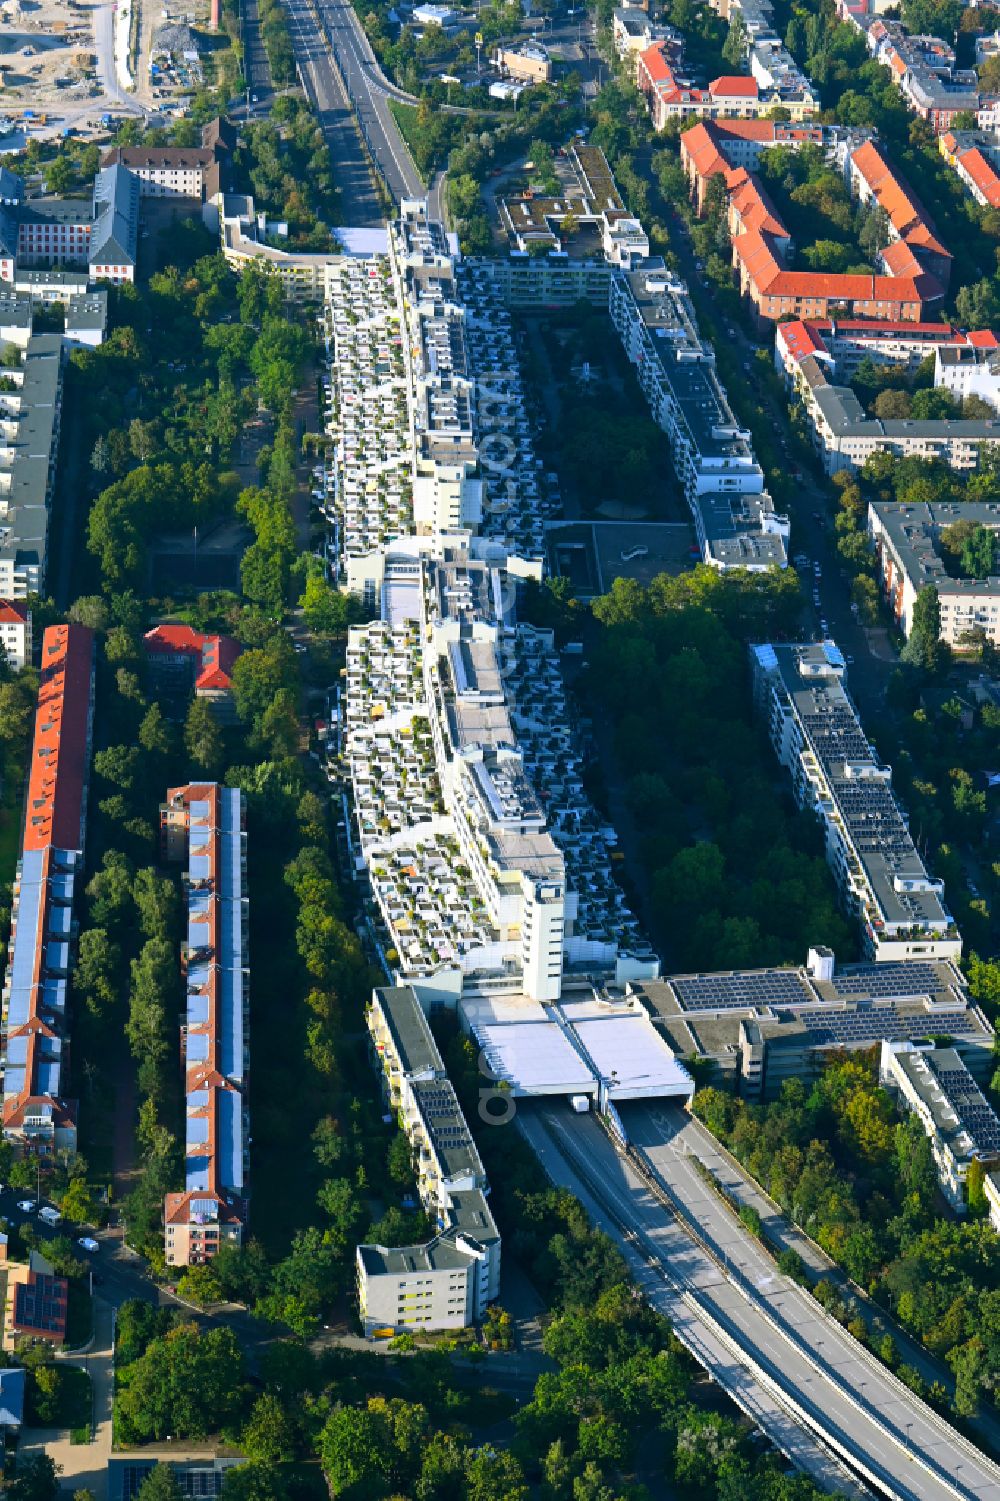 Aerial image Berlin - Roof garden landscape in the residential area of a multi-family house settlement Schlangenbader Strasse in Berlin